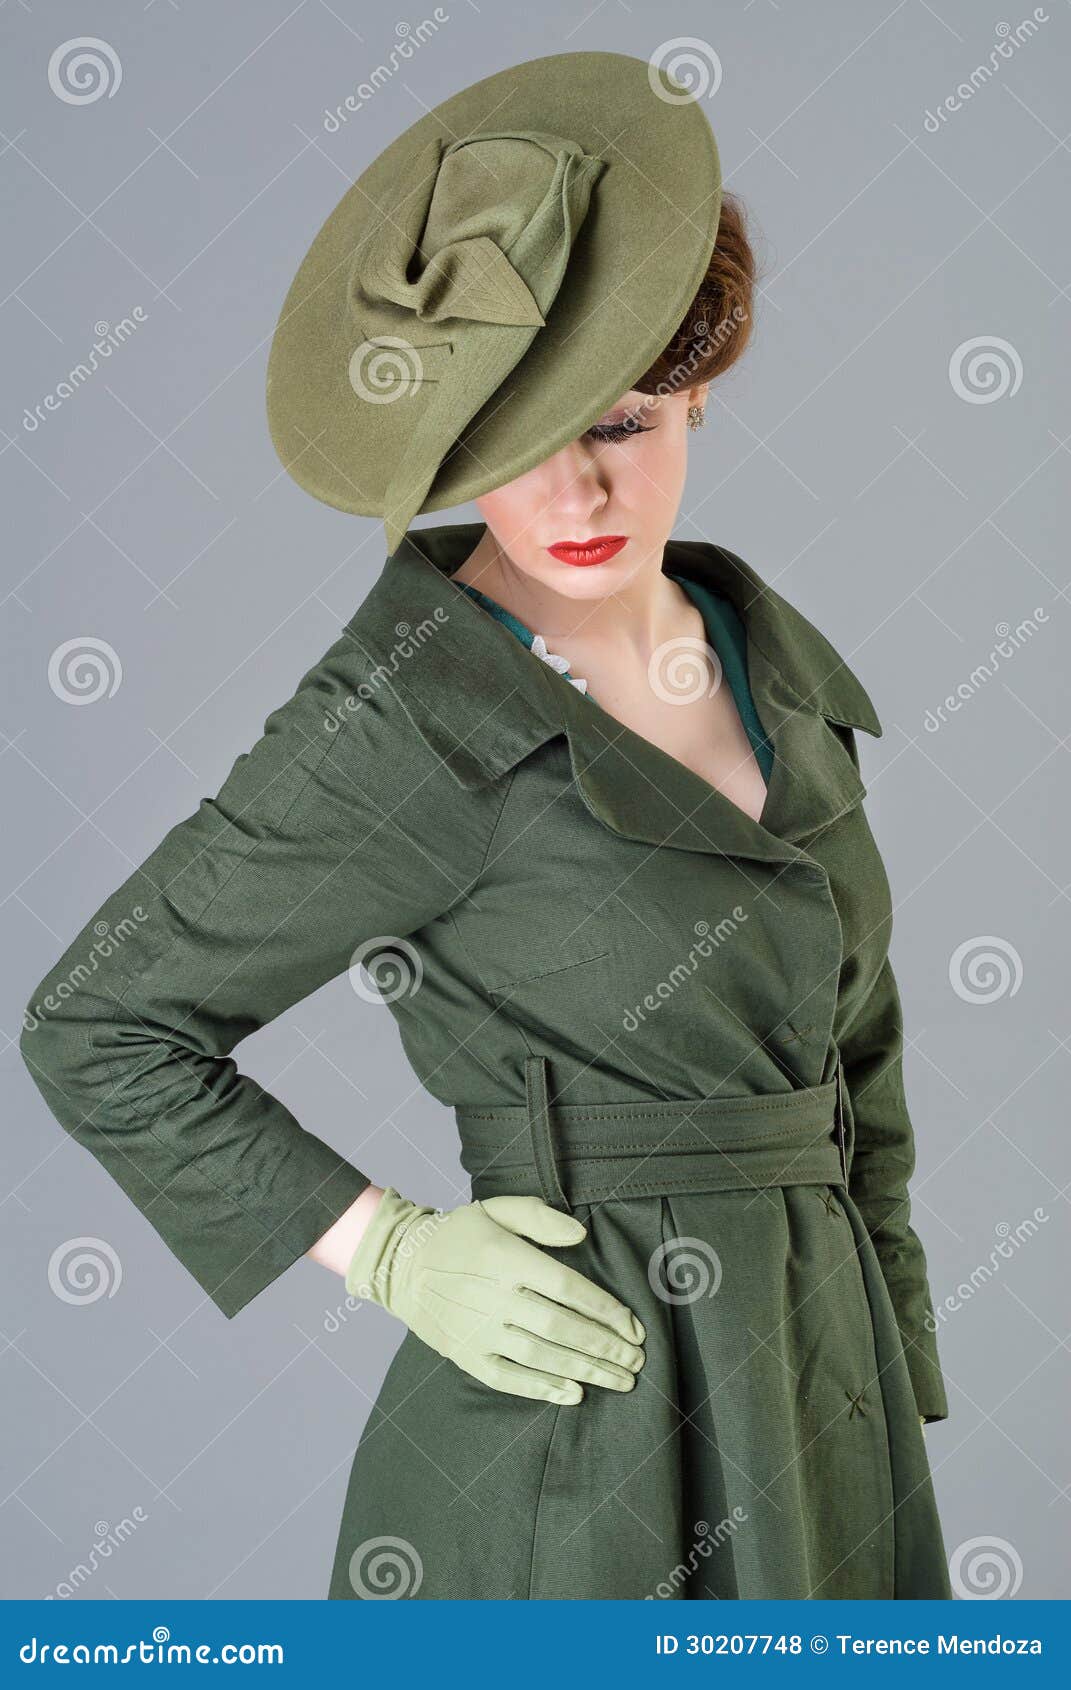 forties vintage vogue style high fashion woman